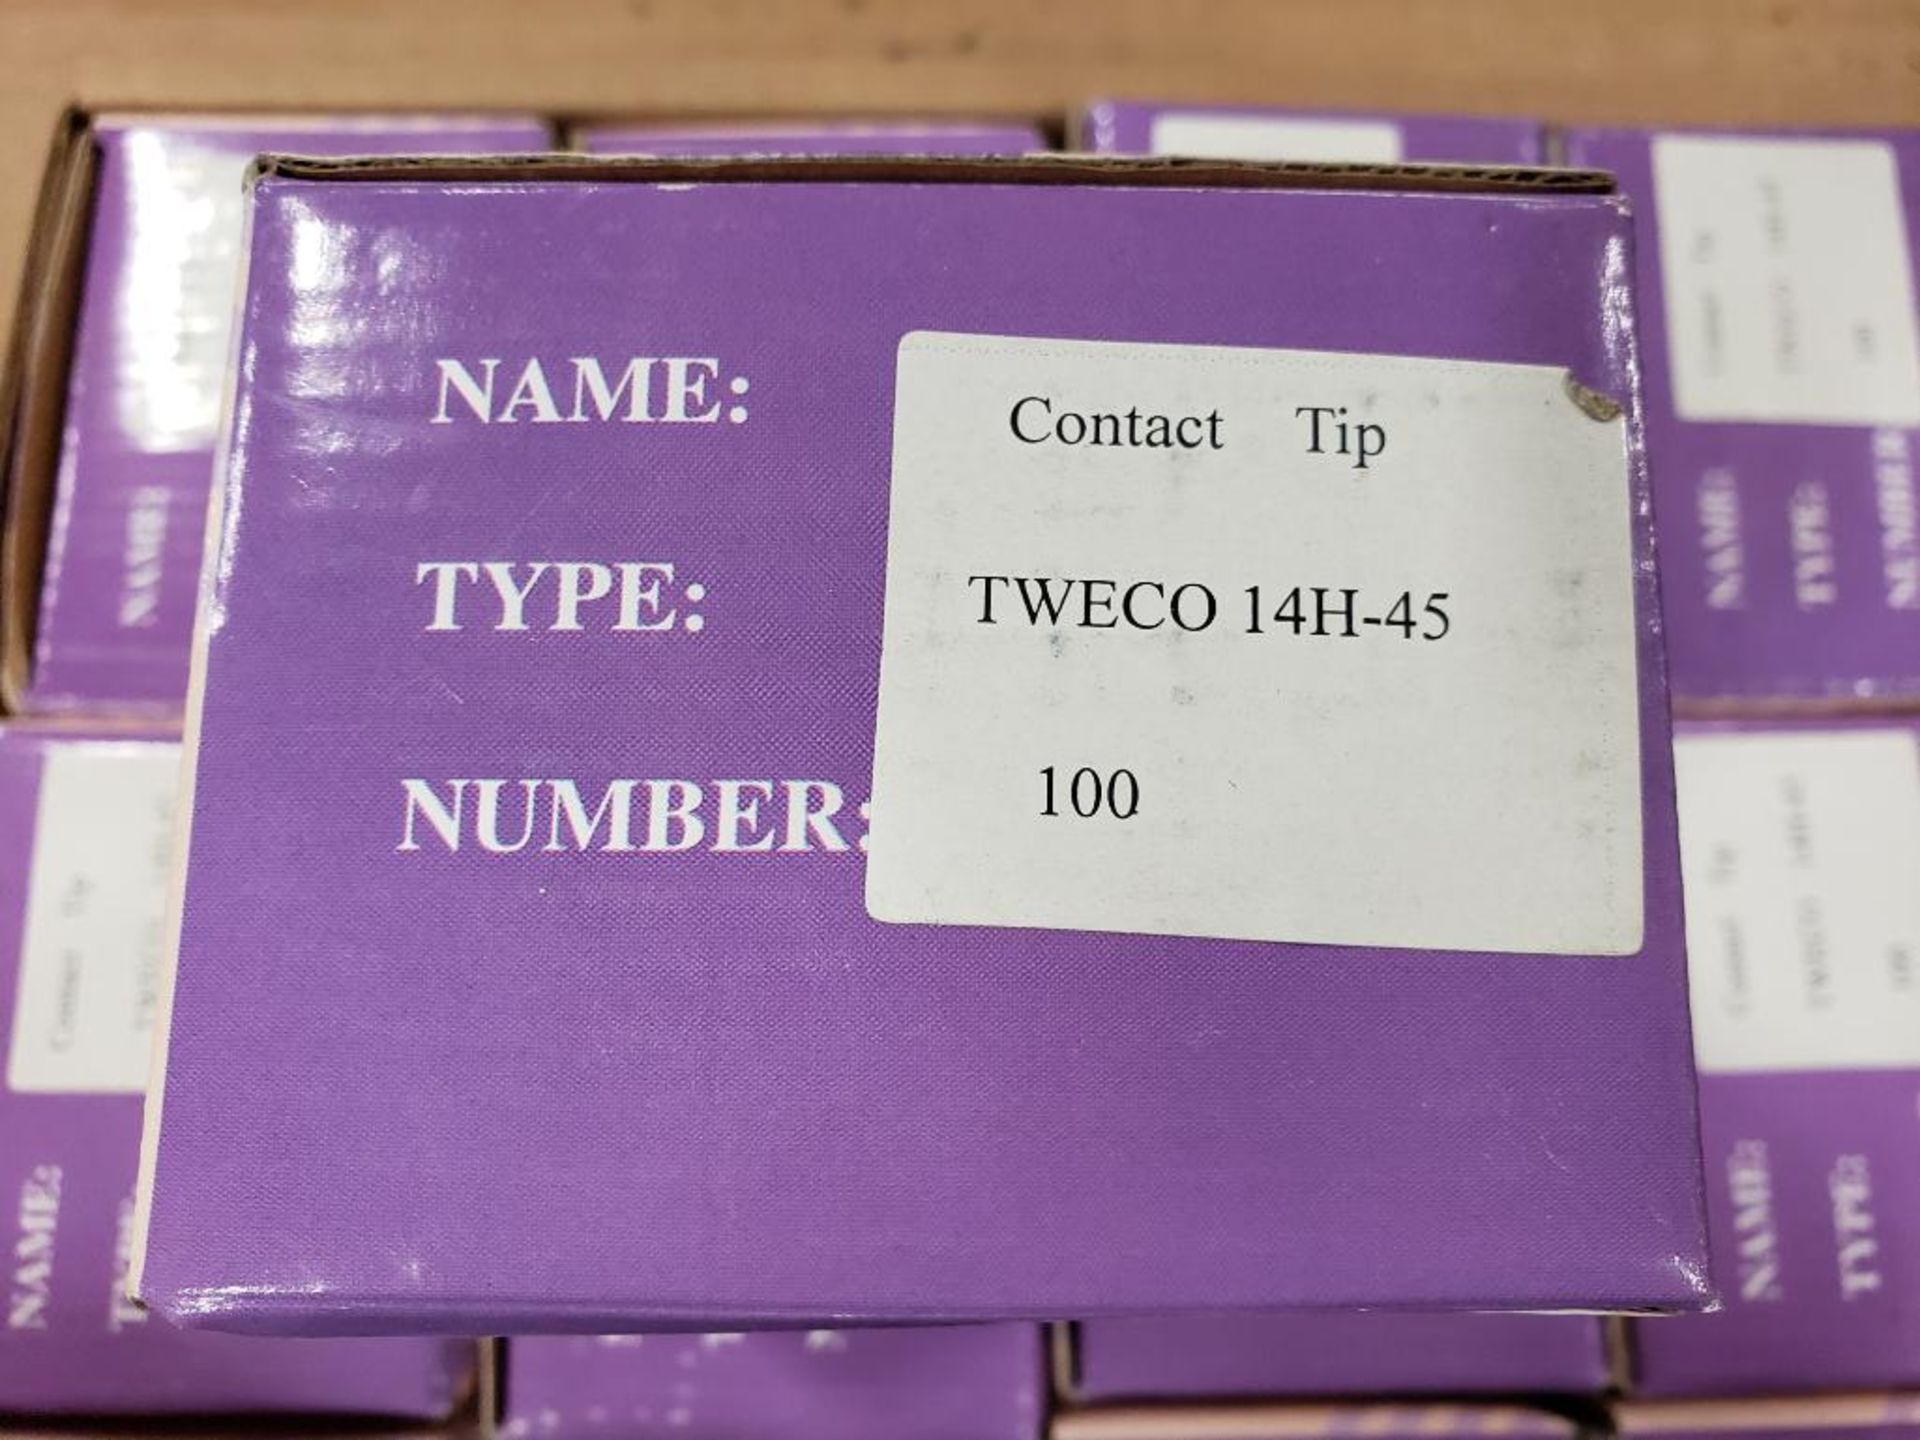 Qty 1200 - Red Onyx welding tips. Part number 14H-35. 12 boxes of 100 in 10 packs. - Image 4 of 5